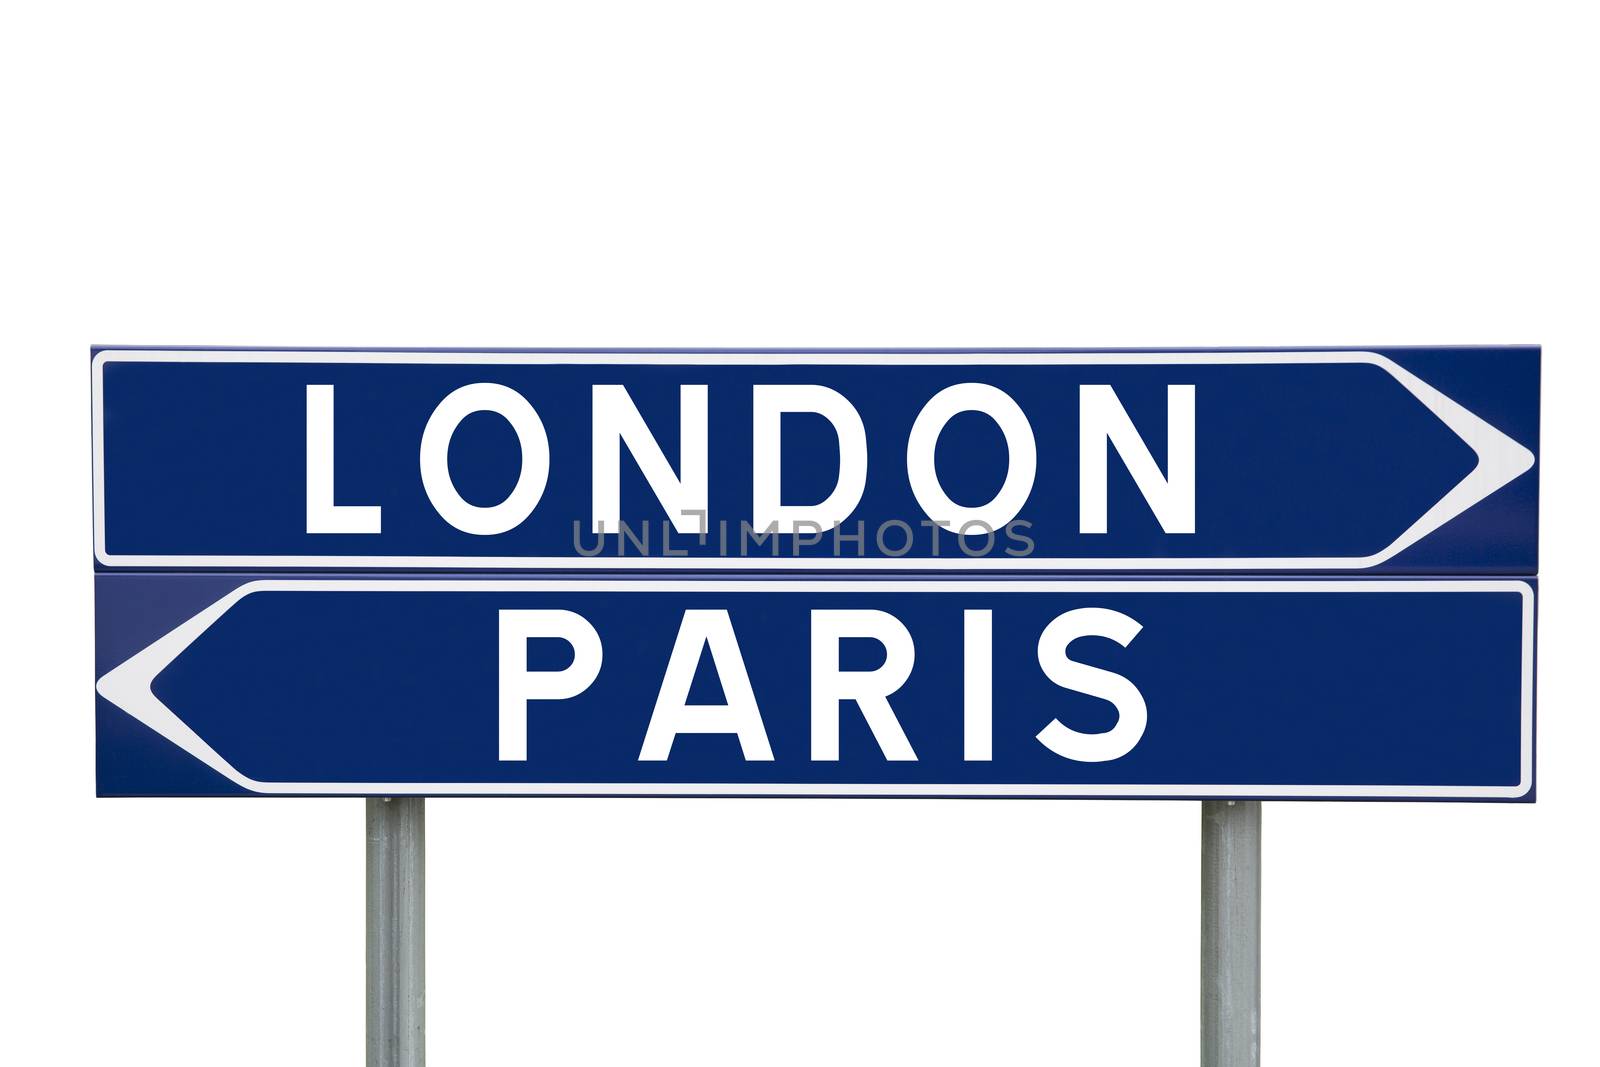 Blue Direction Signs with choice between London or Paris isolated on white background